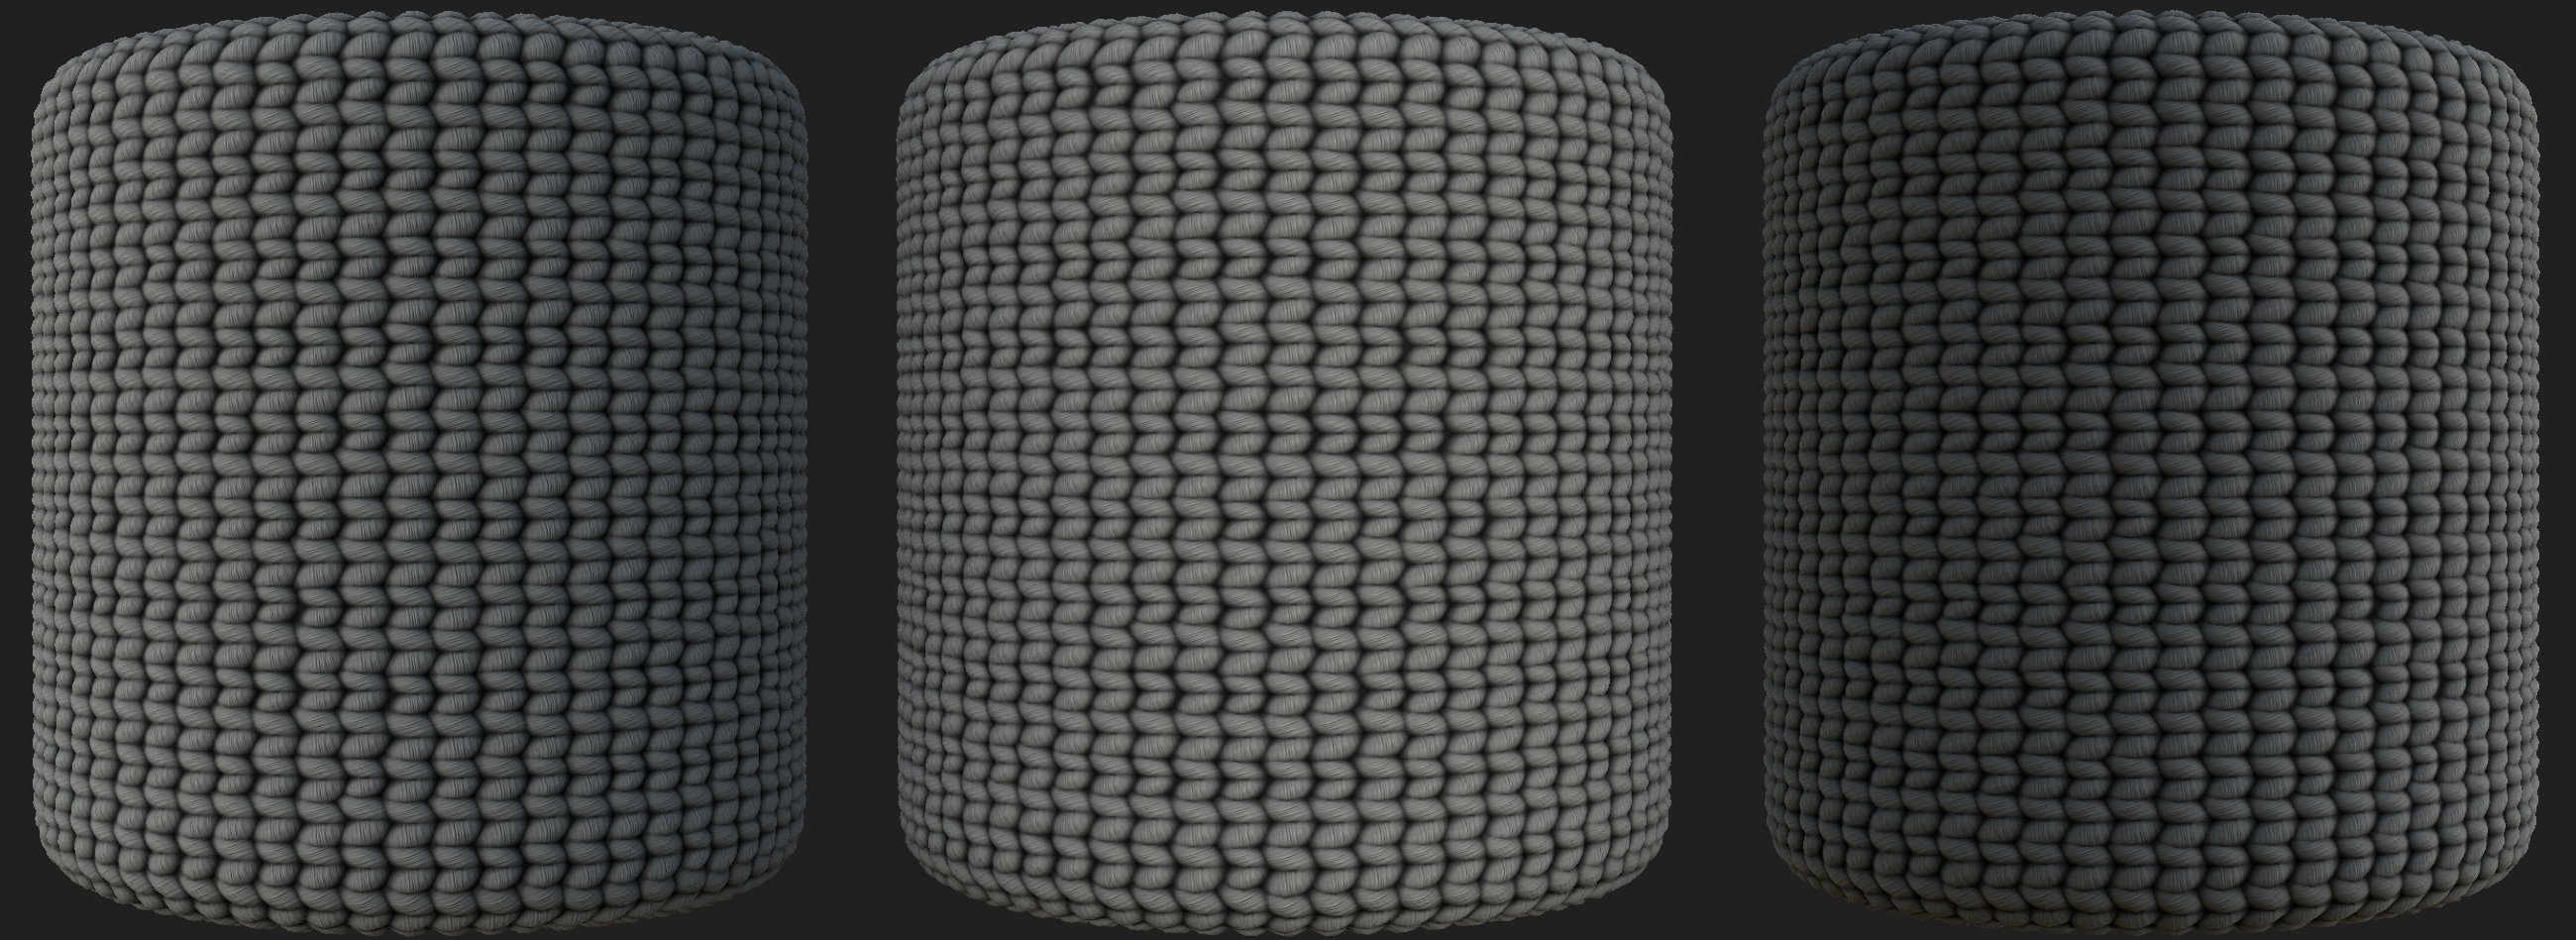 Procedural wool material I created in Substance Designer, without albedo